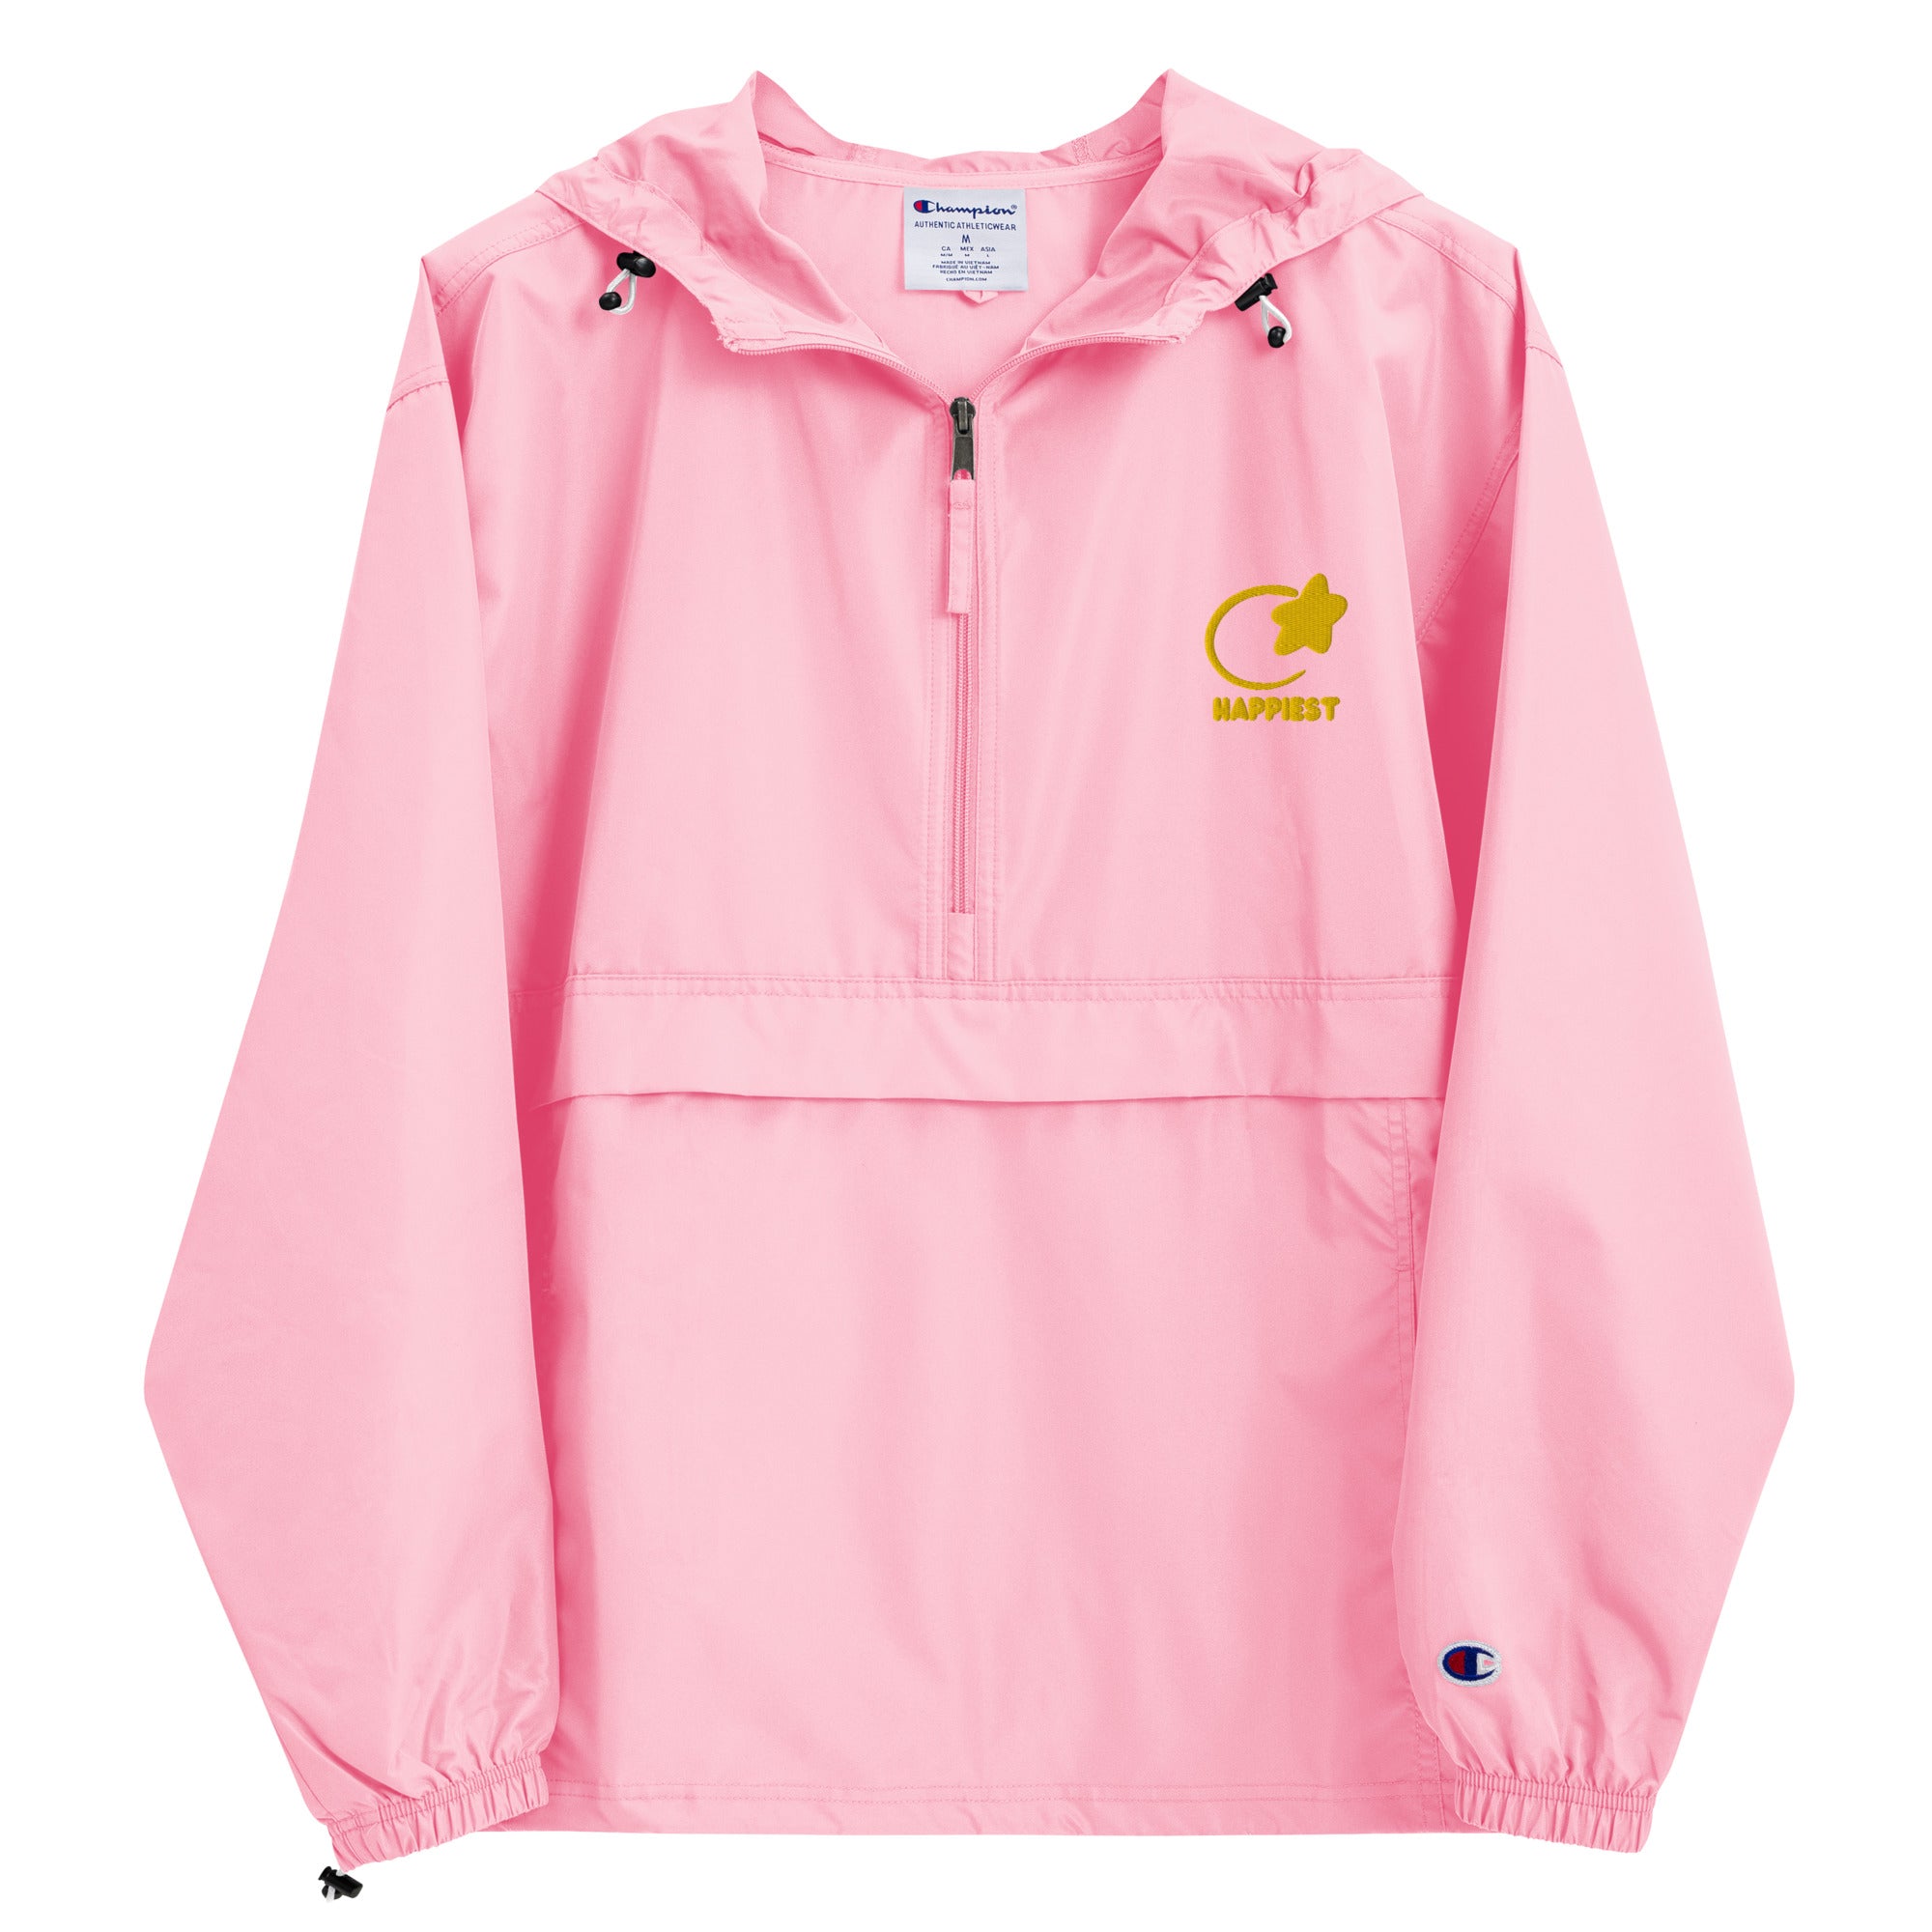 Happiest Embroidered Champion Packable Jacket